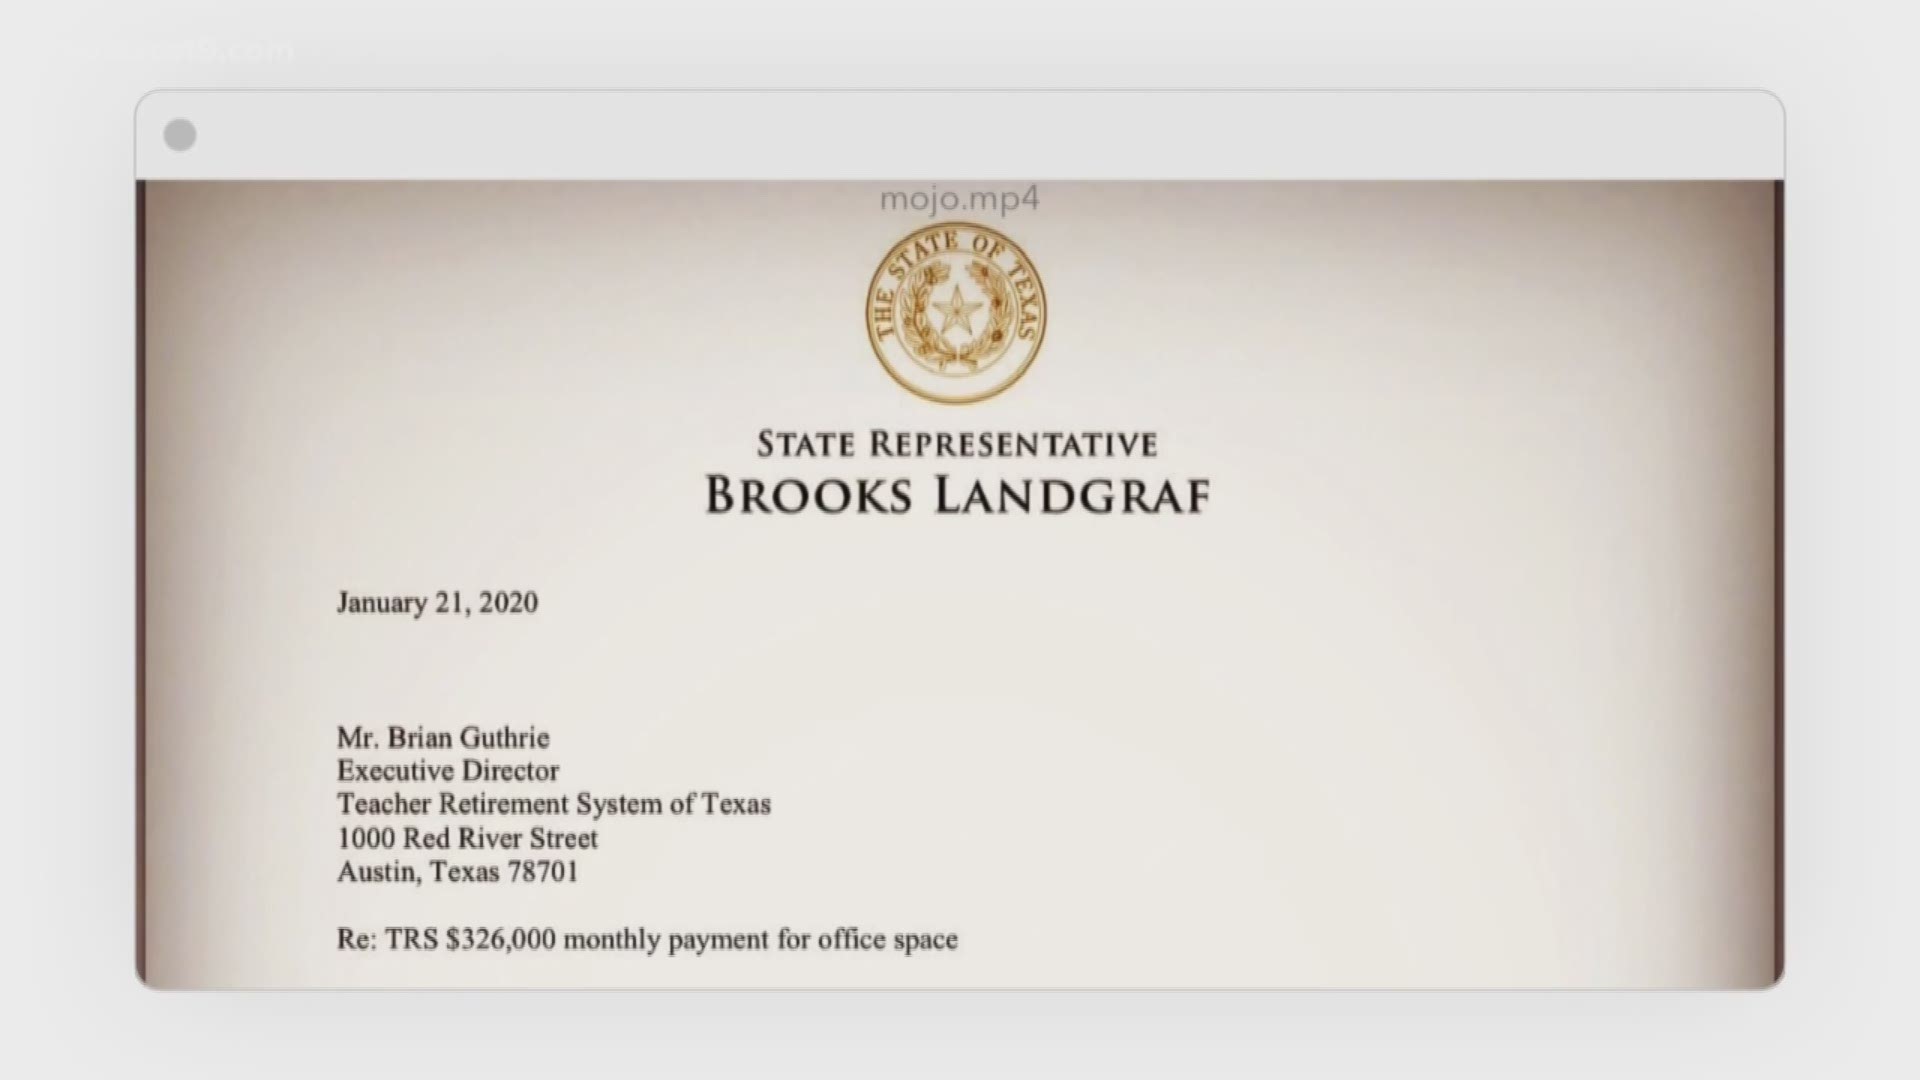 State Rep. Brooks Landgraf of Odessa drafted TRS to reconsider Lease